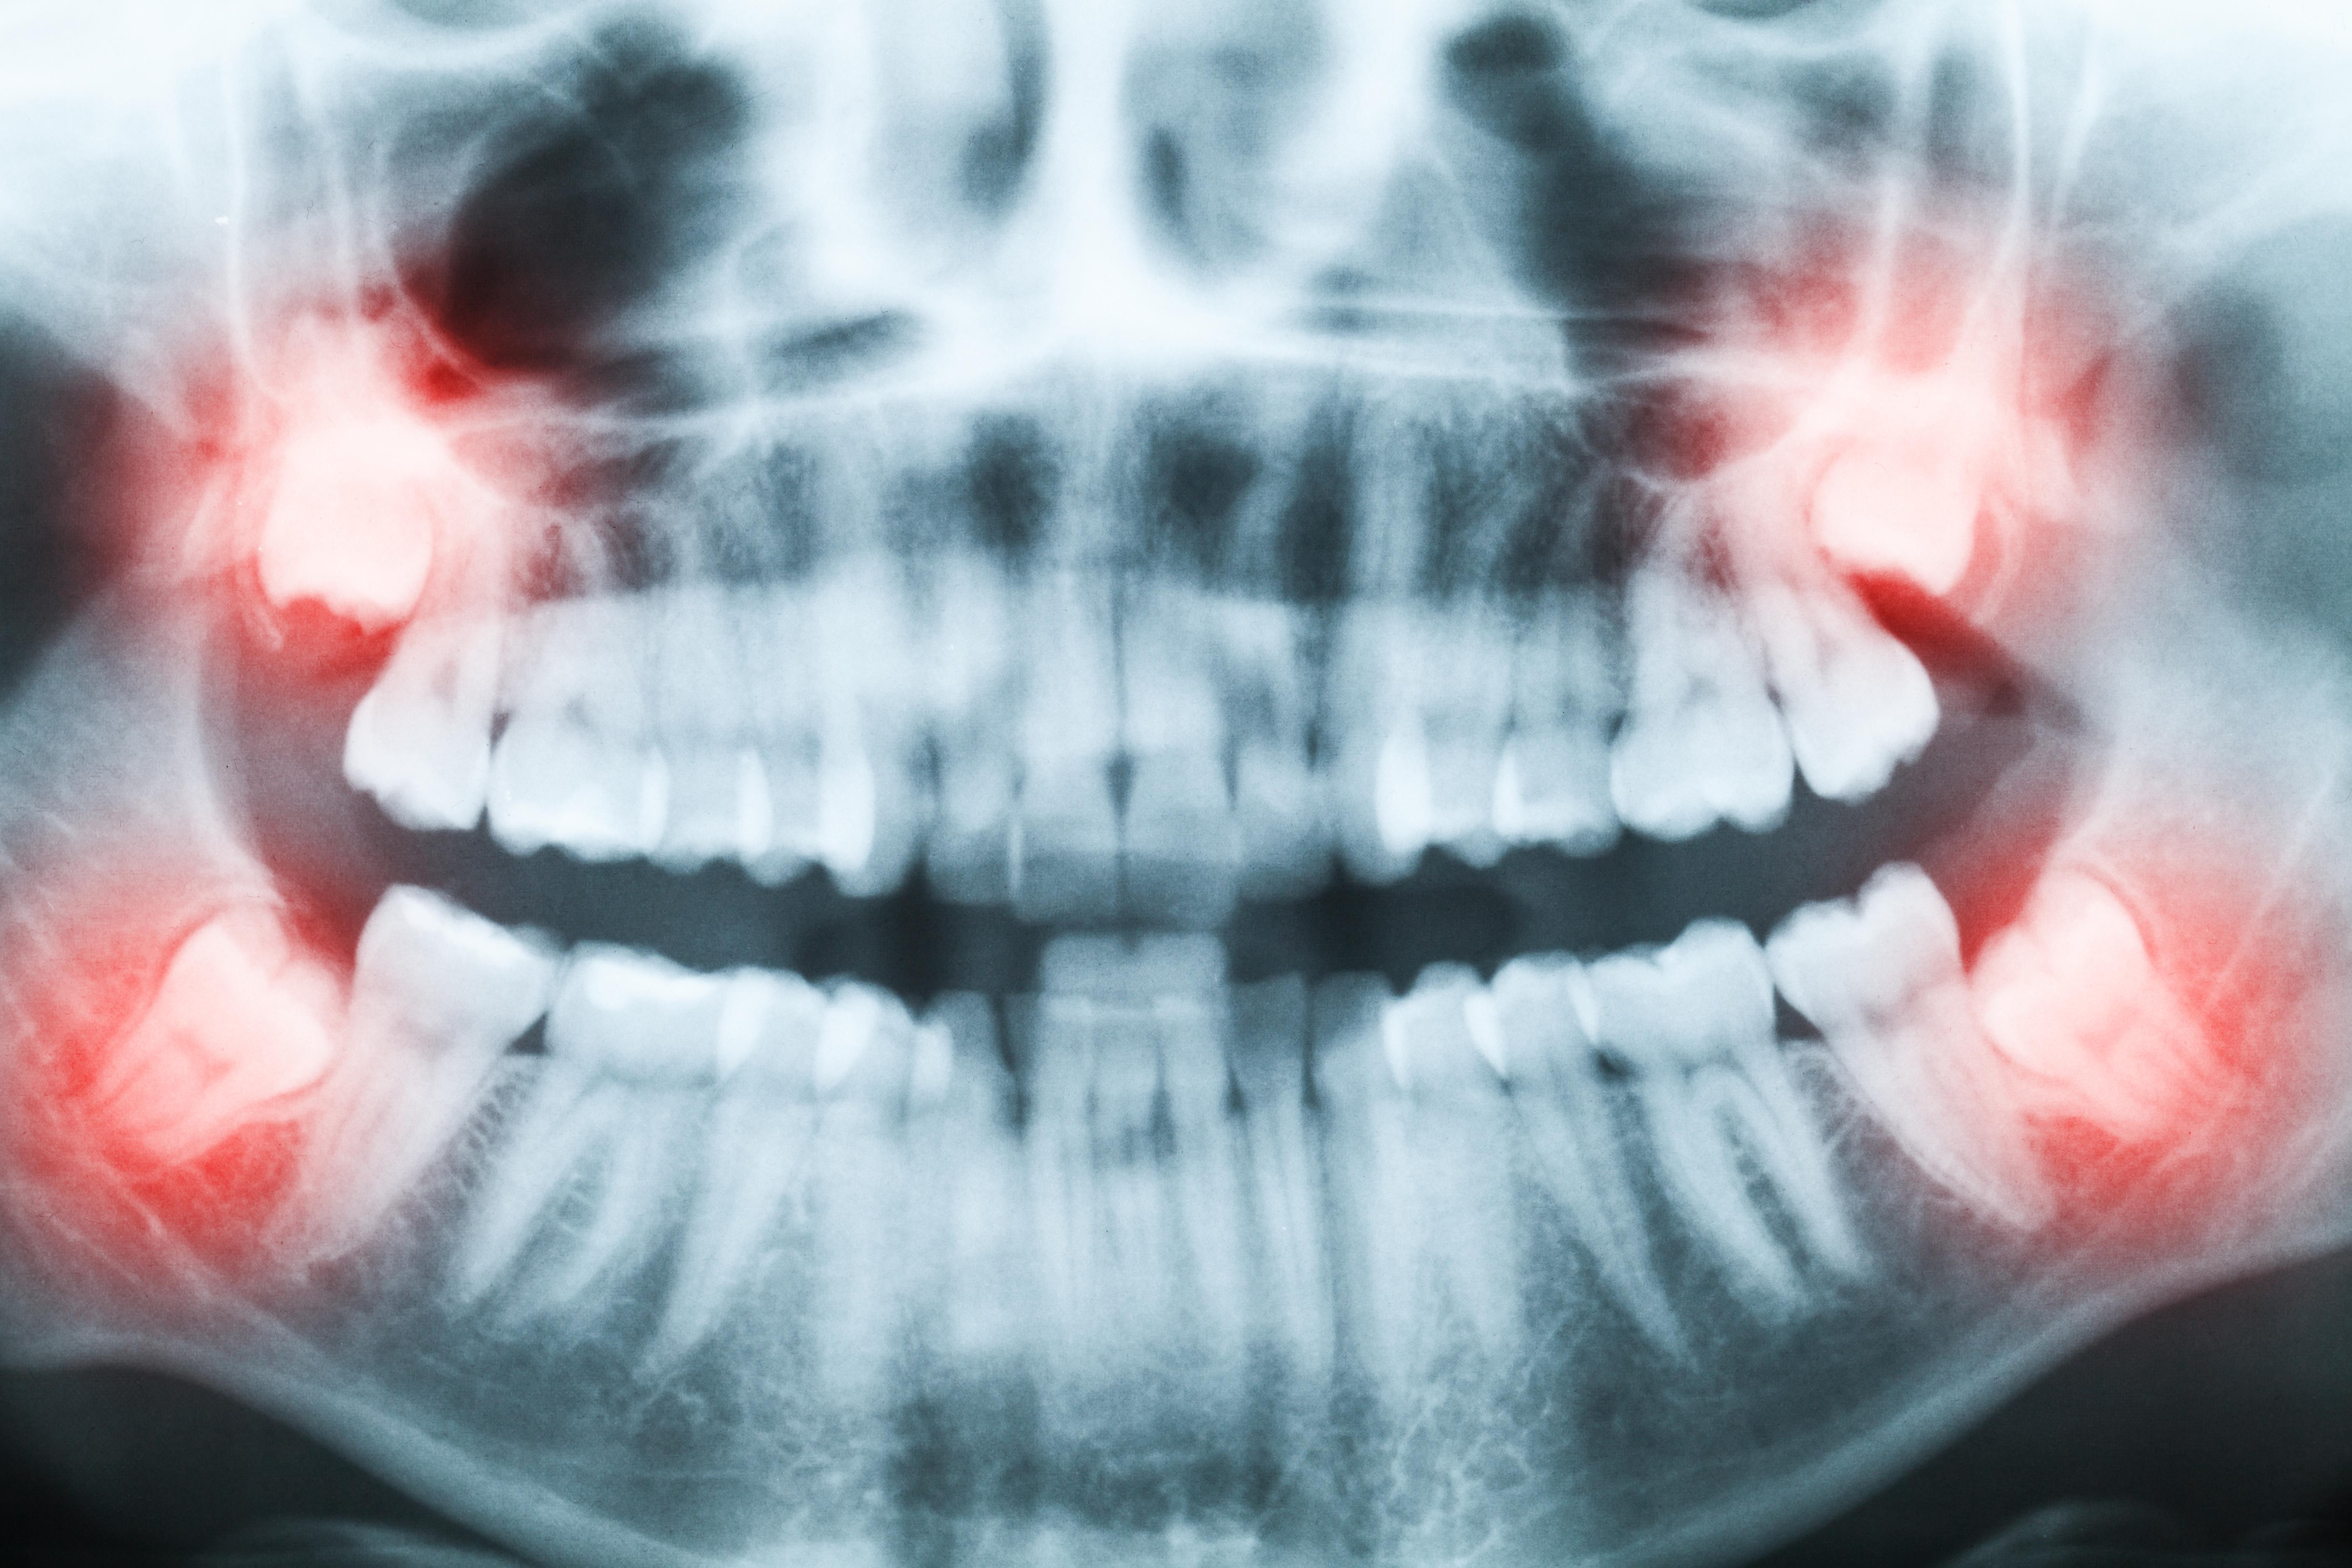 Wisdom Teeth Removal | Tooth Extraction Cost & Recovery Info